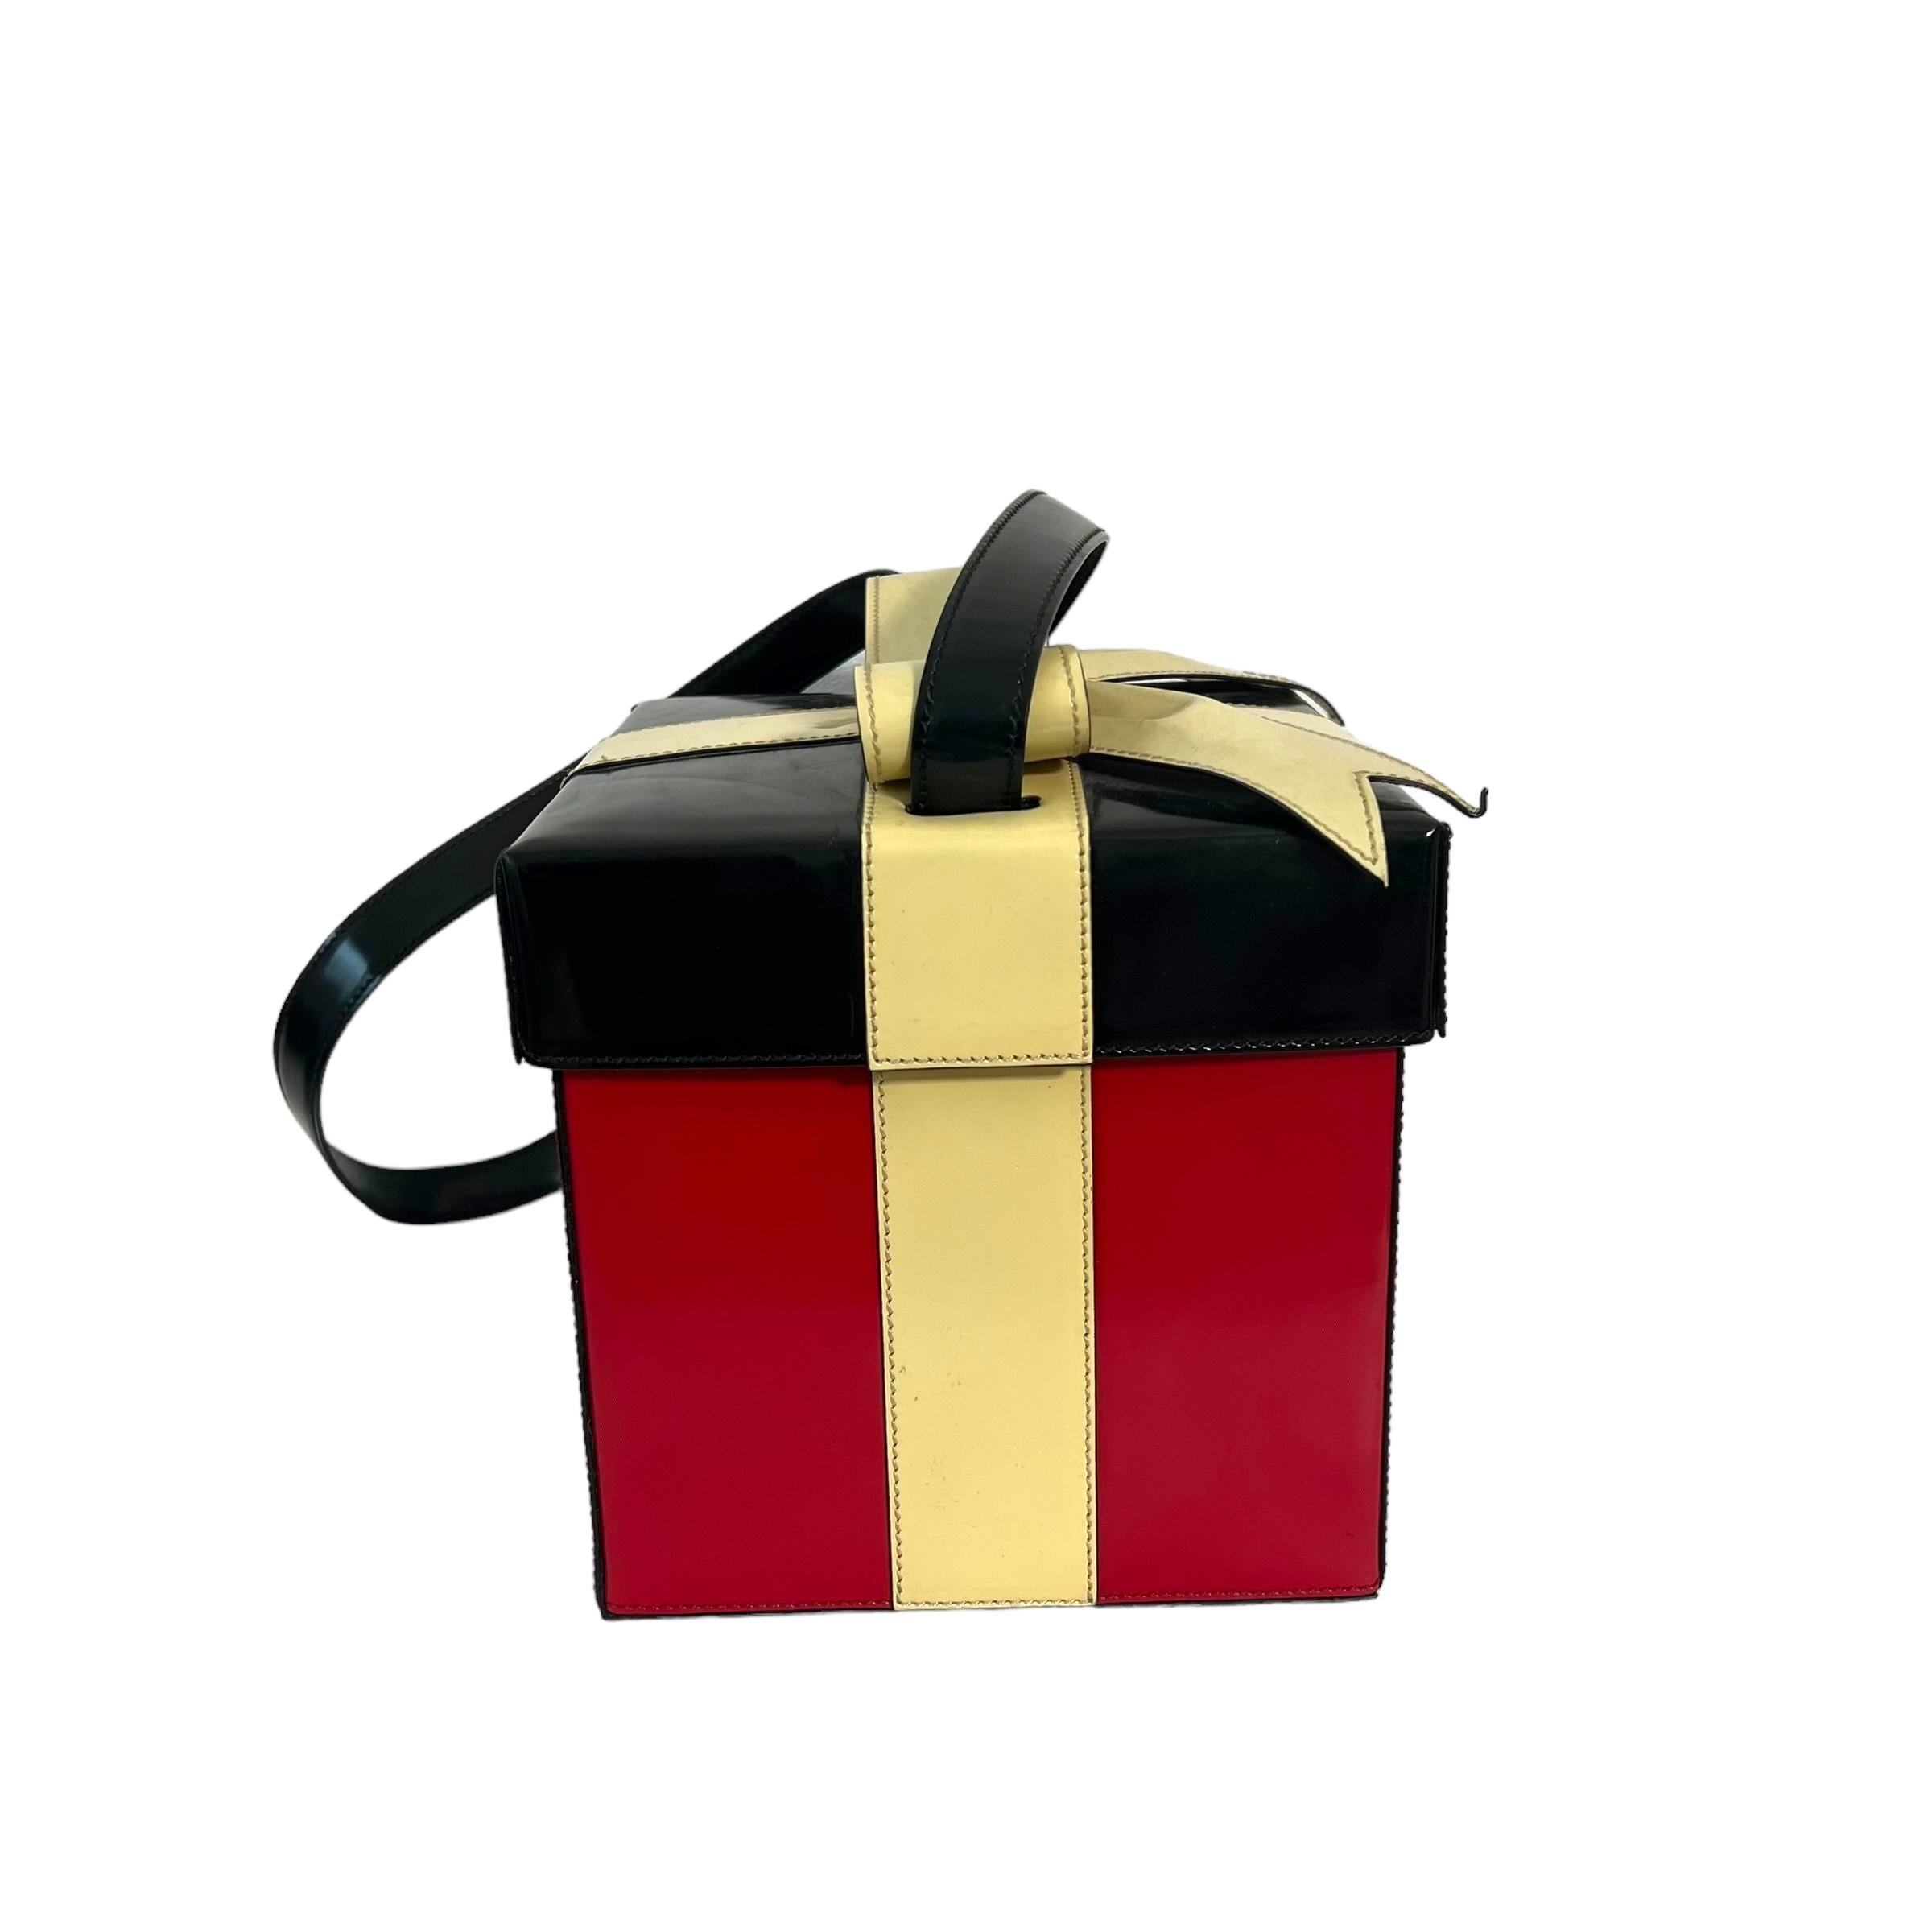 
This Moschino handbag is a rare vintage piece, perfect for the holidays! Made in Italy, the black and red colors with a gorgeous ribbon detailing truly give it the look of a gift. As a collector's item from the 90s, its pre-owned condition adds to